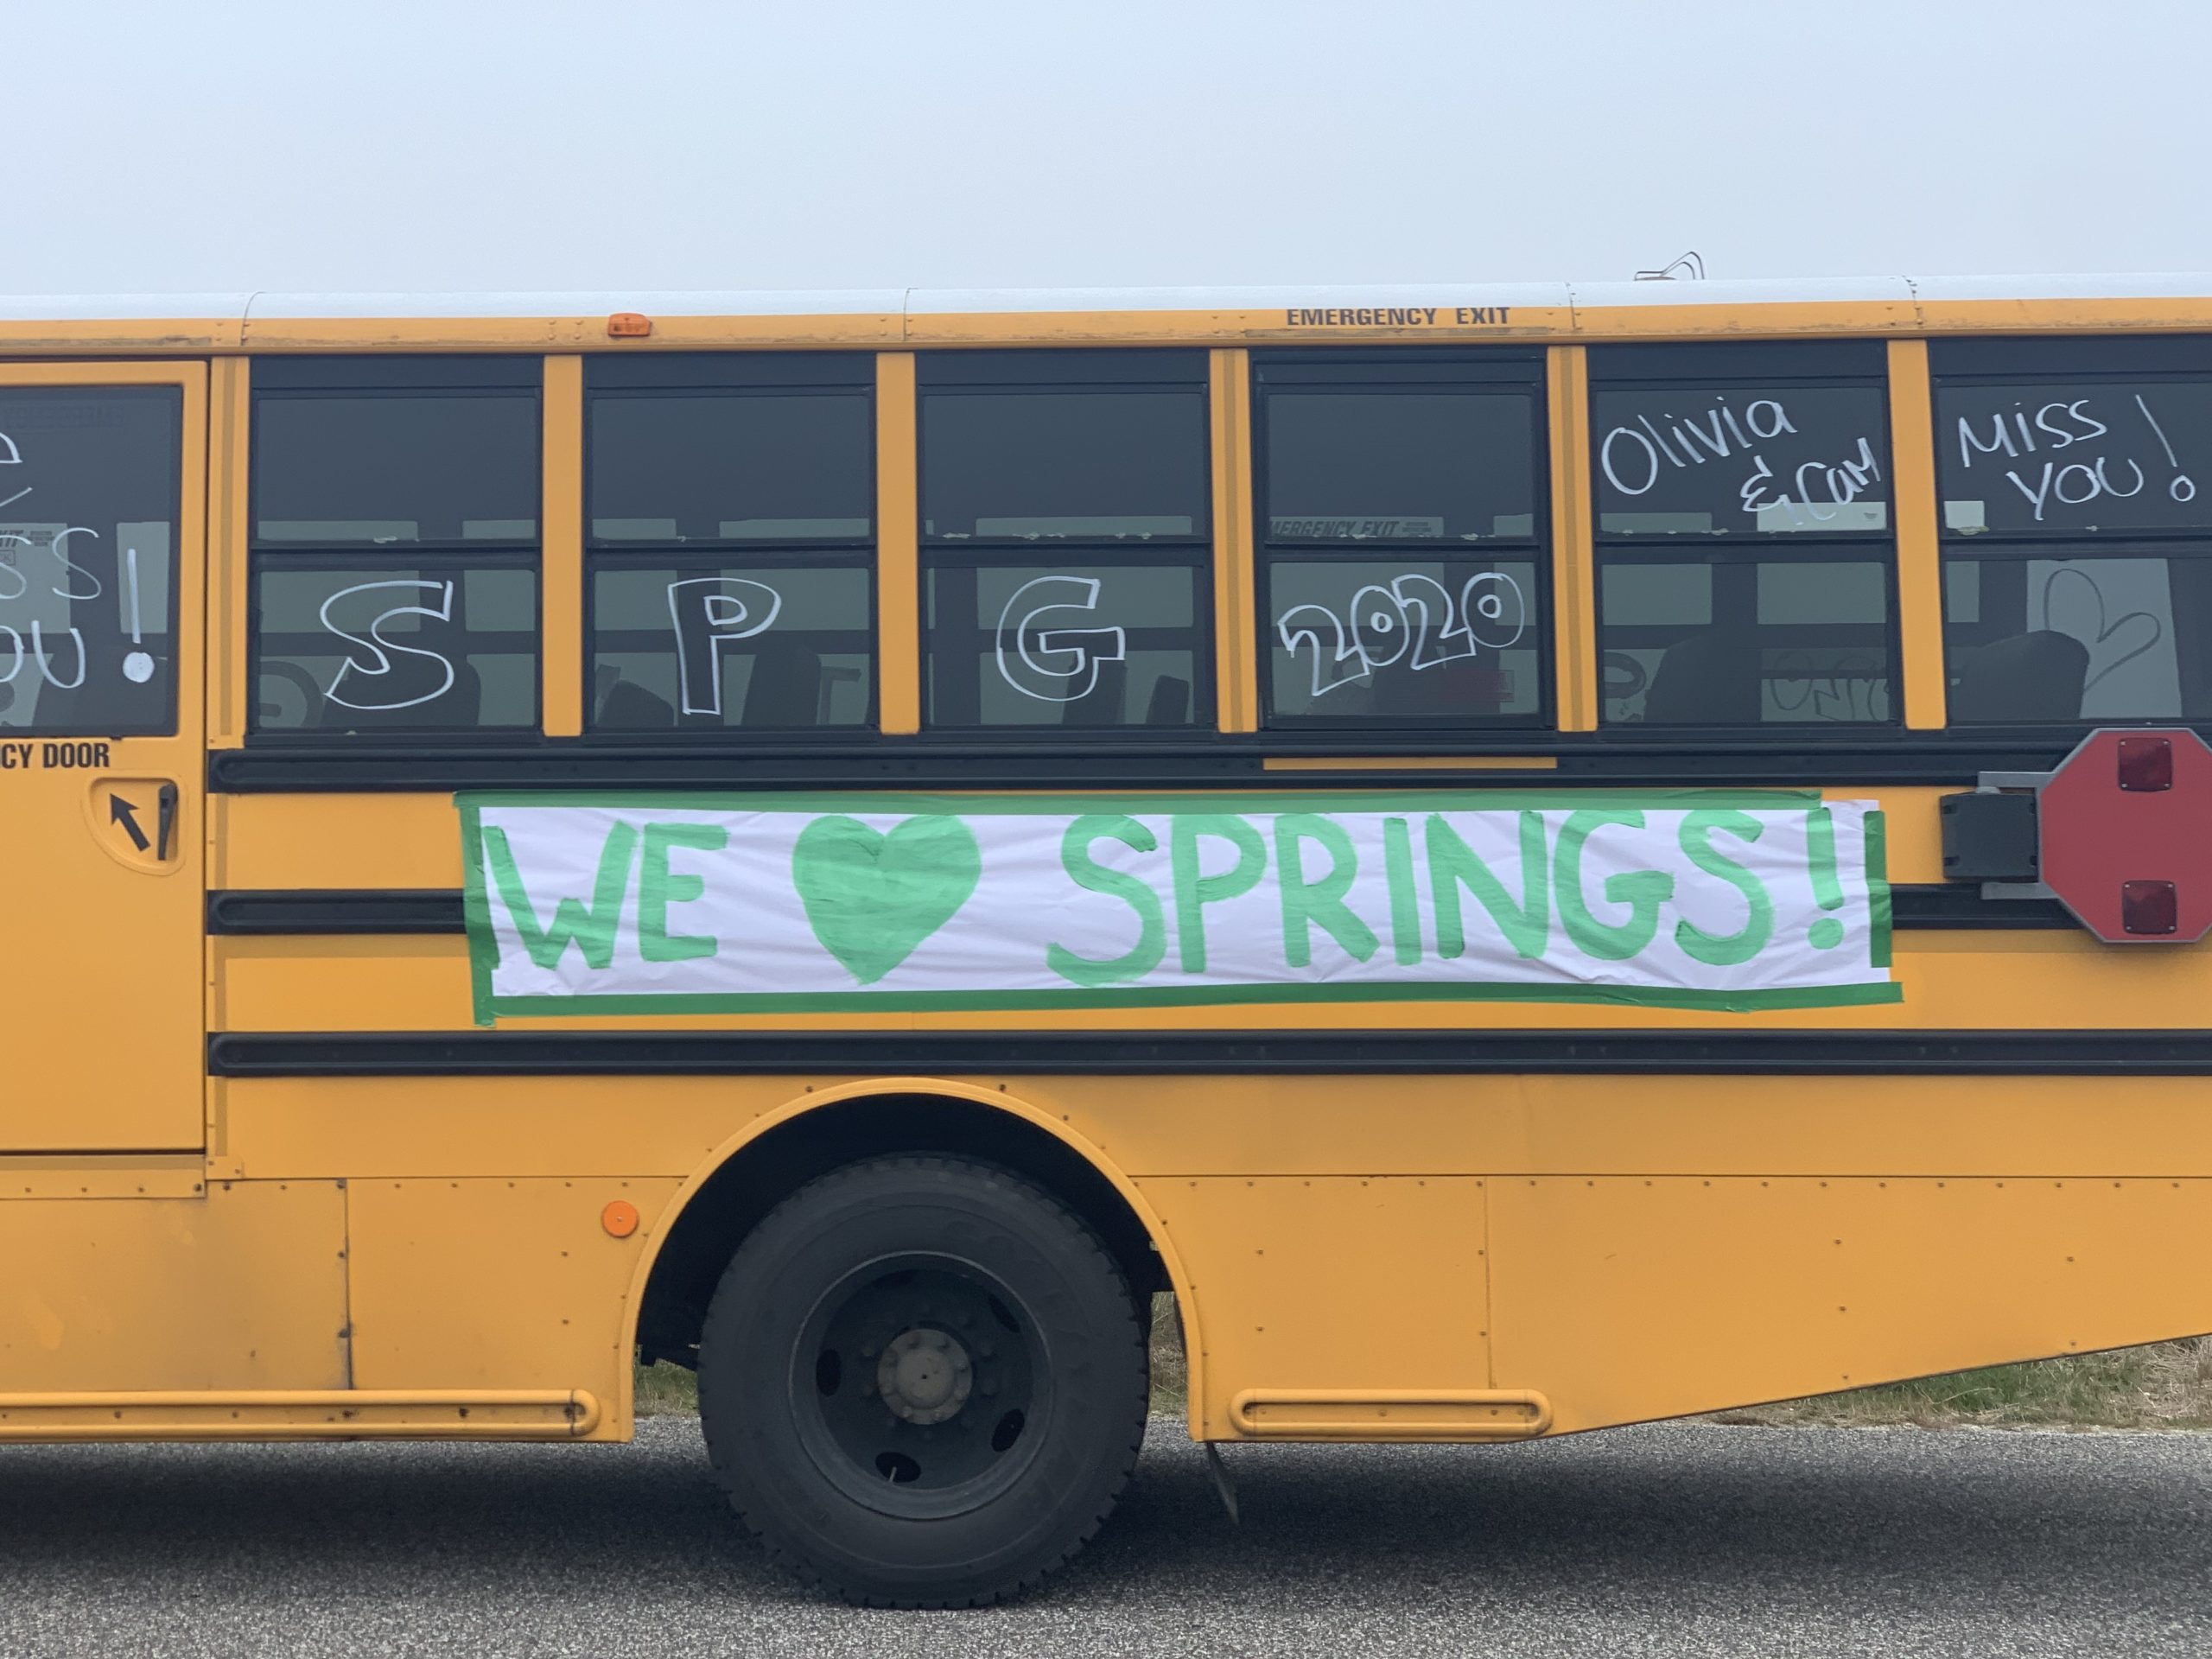 School buses and teacher's vehciles were adorned with messages of school spirit during Friday's Spirit Drive around Springs. 